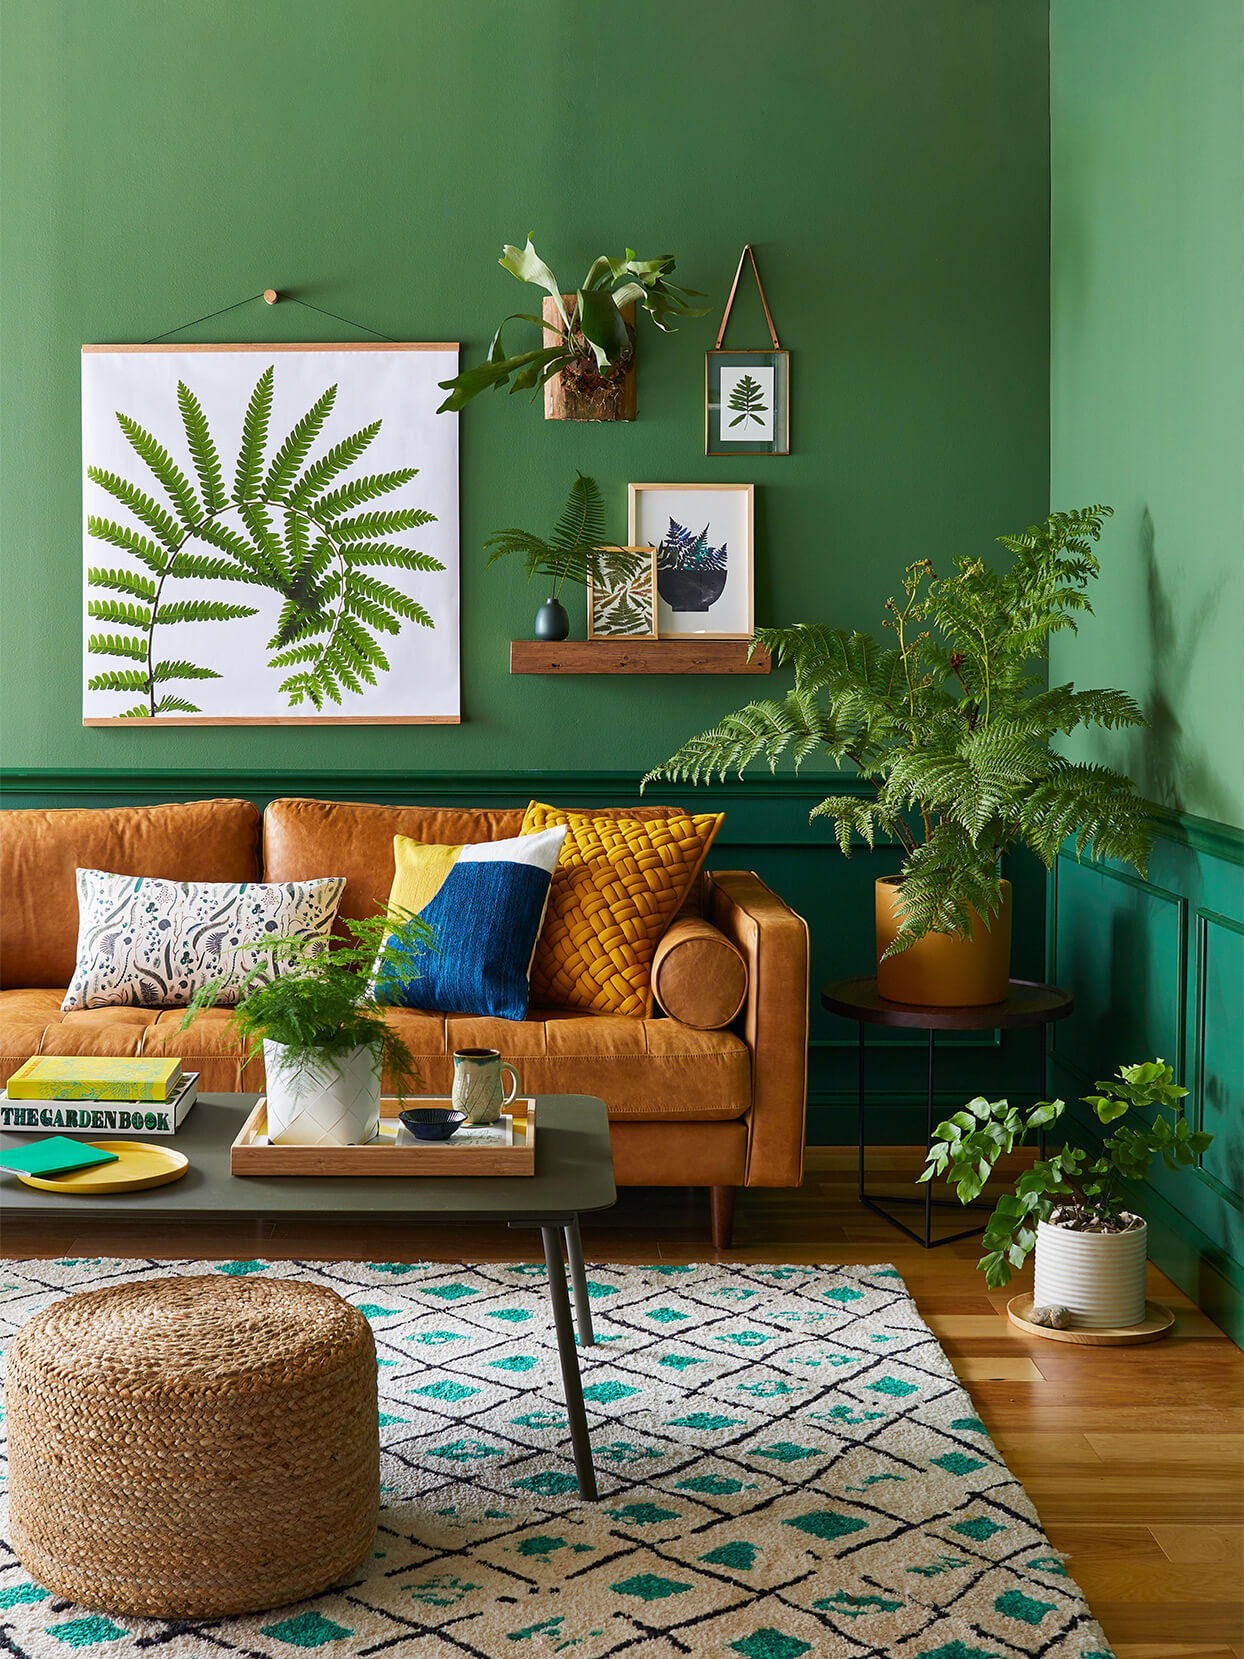 5- AN ECLECTIC ROOM WITH GREEN ELEMENTS